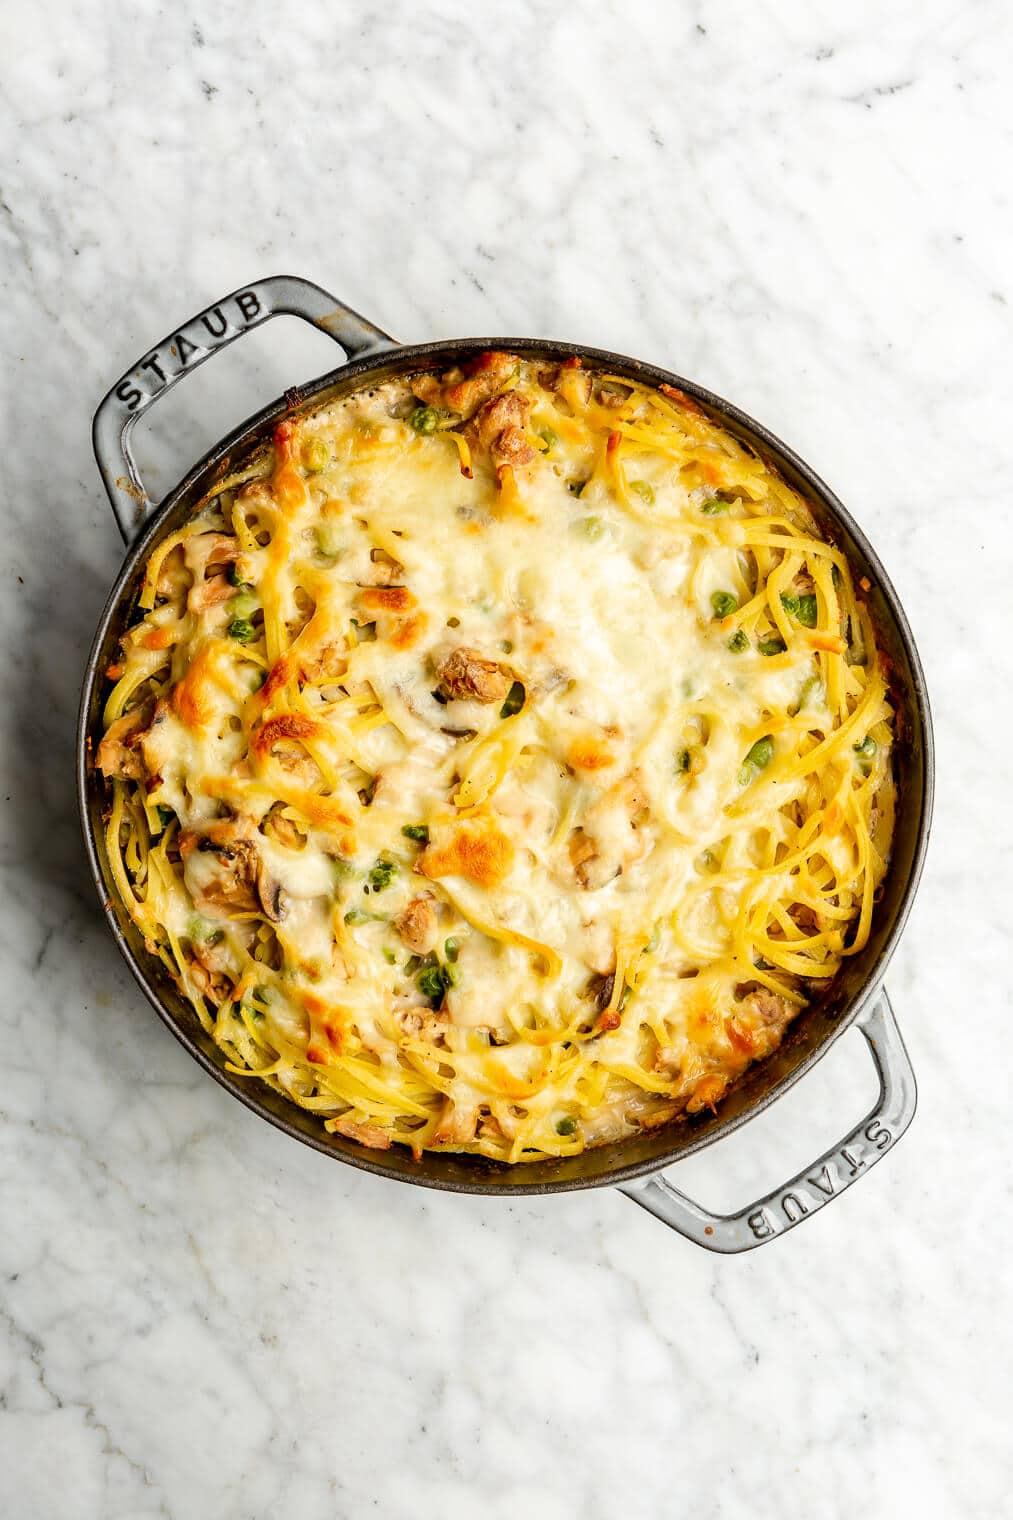 Tuna noodle casserole with melted cheese on top, ready to serve.